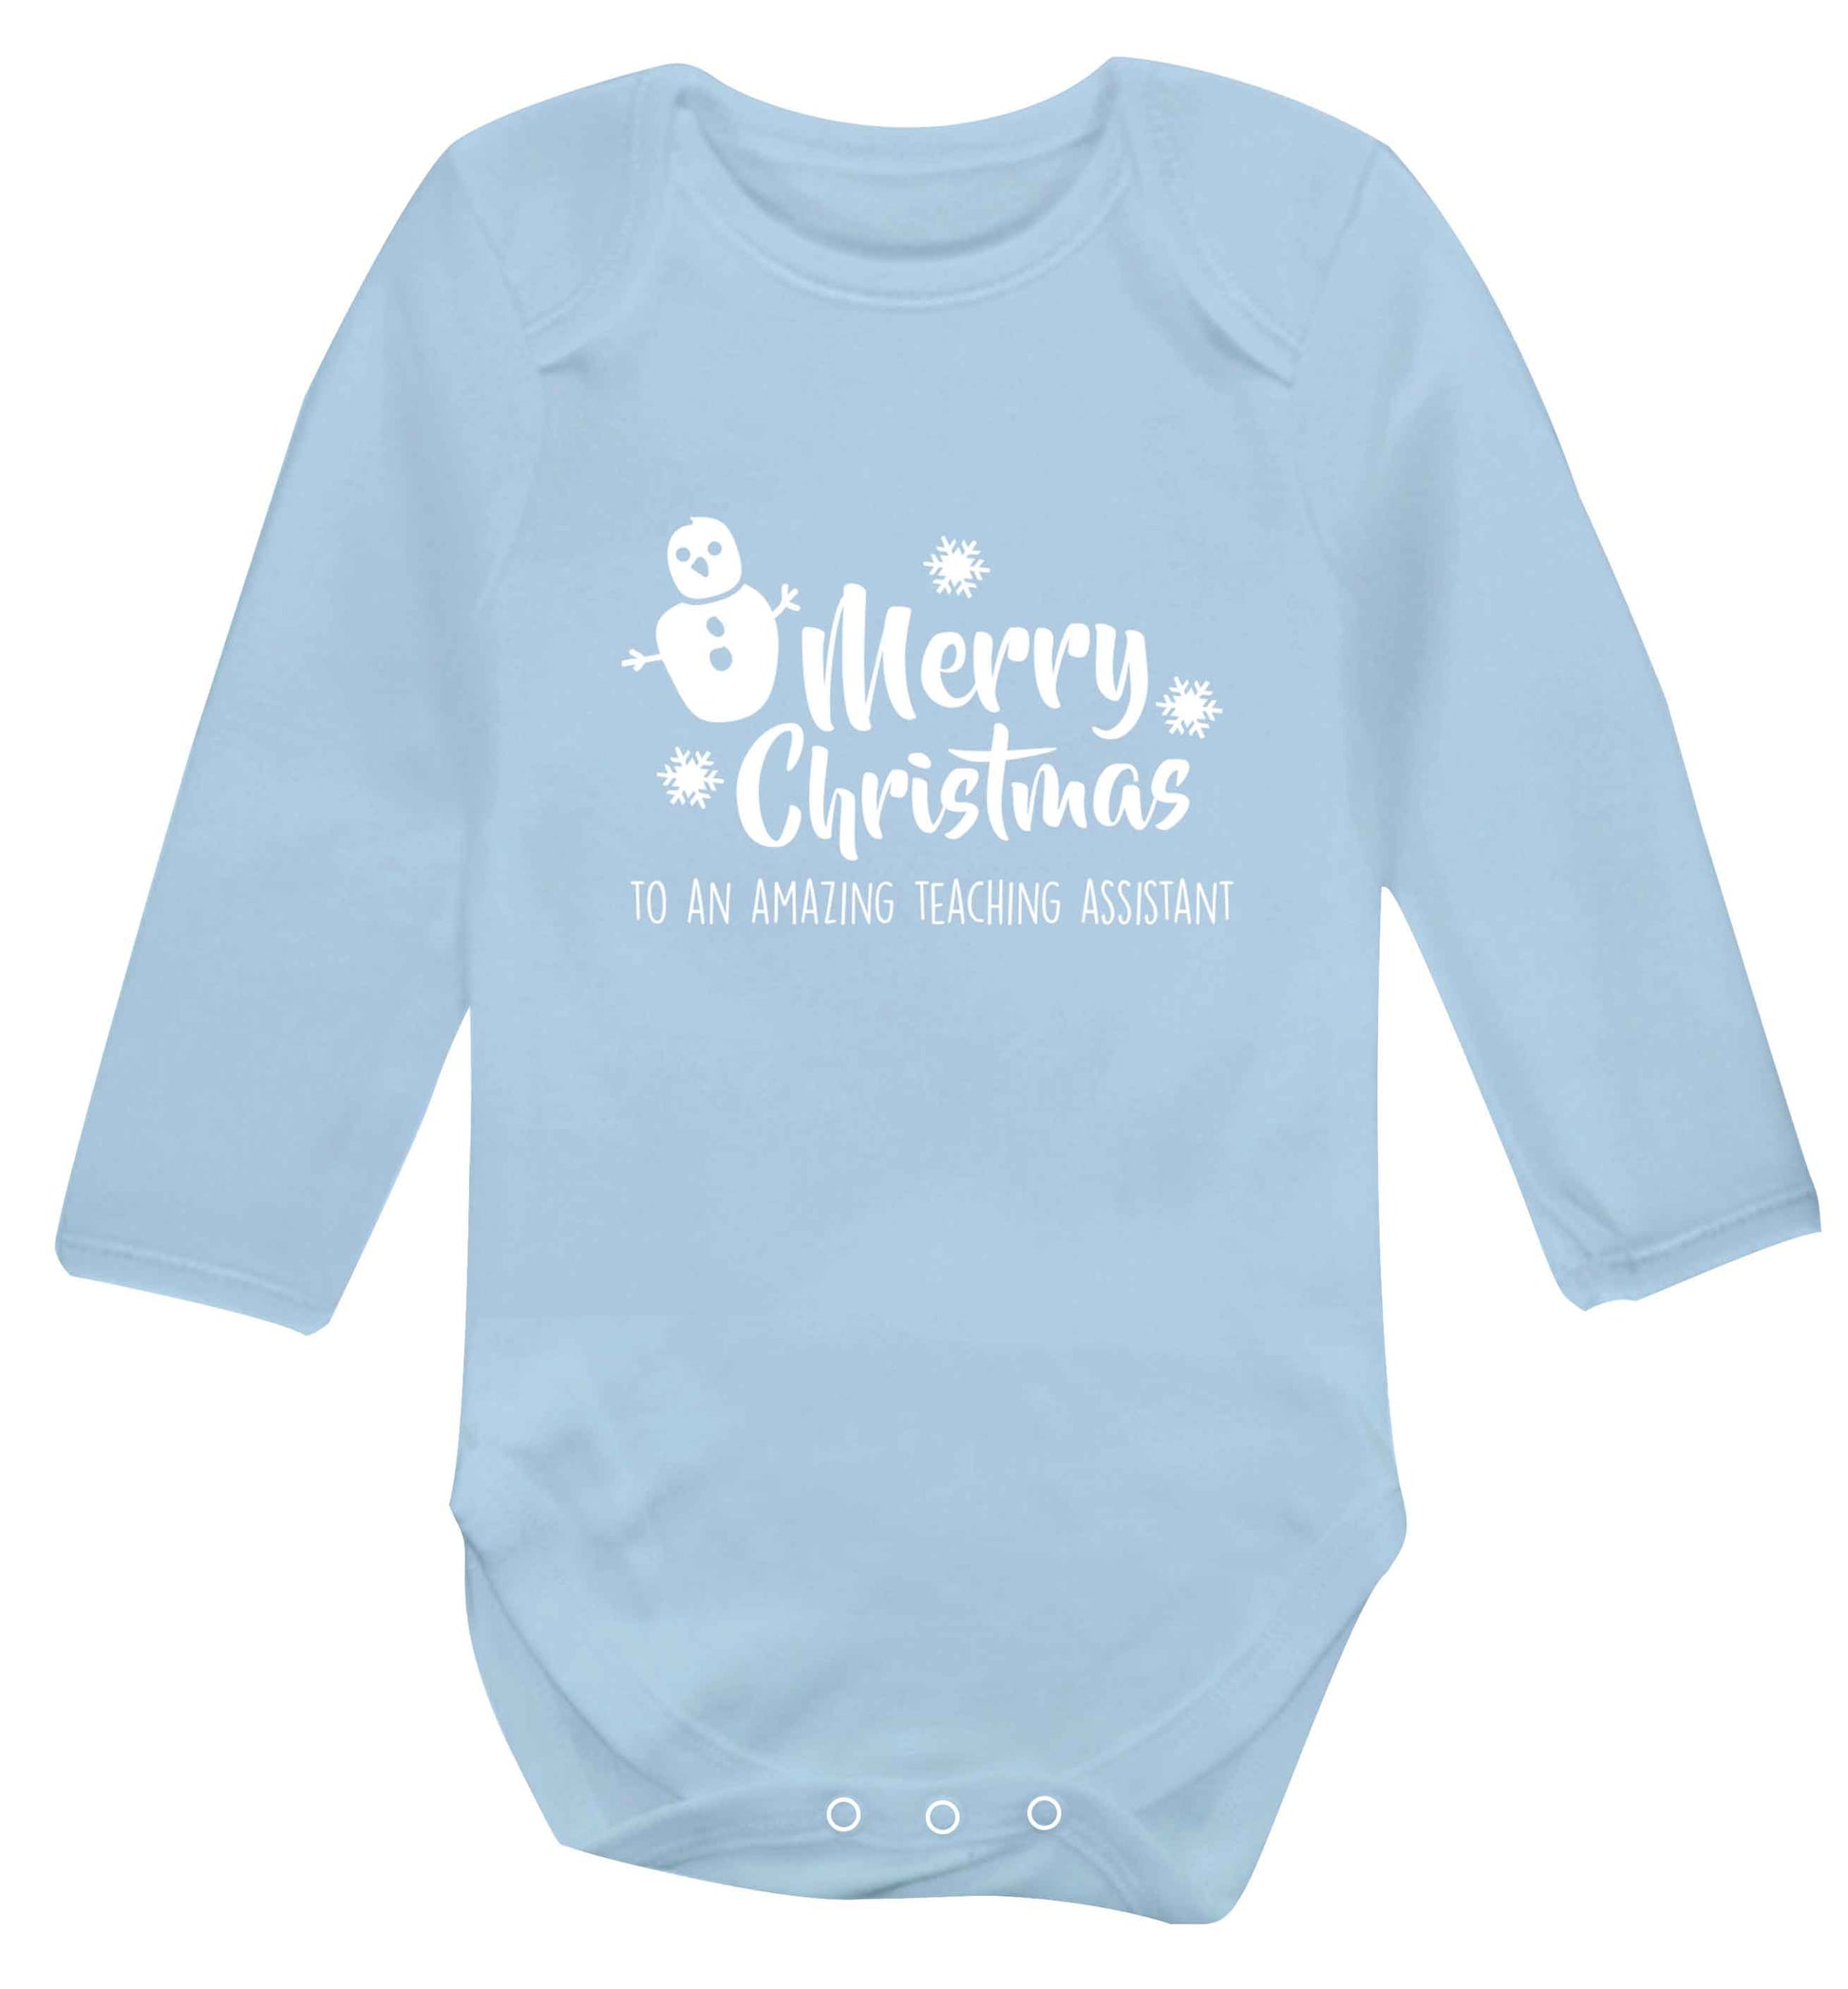 Merry christmas to my teacher baby vest long sleeved pale blue 6-12 months